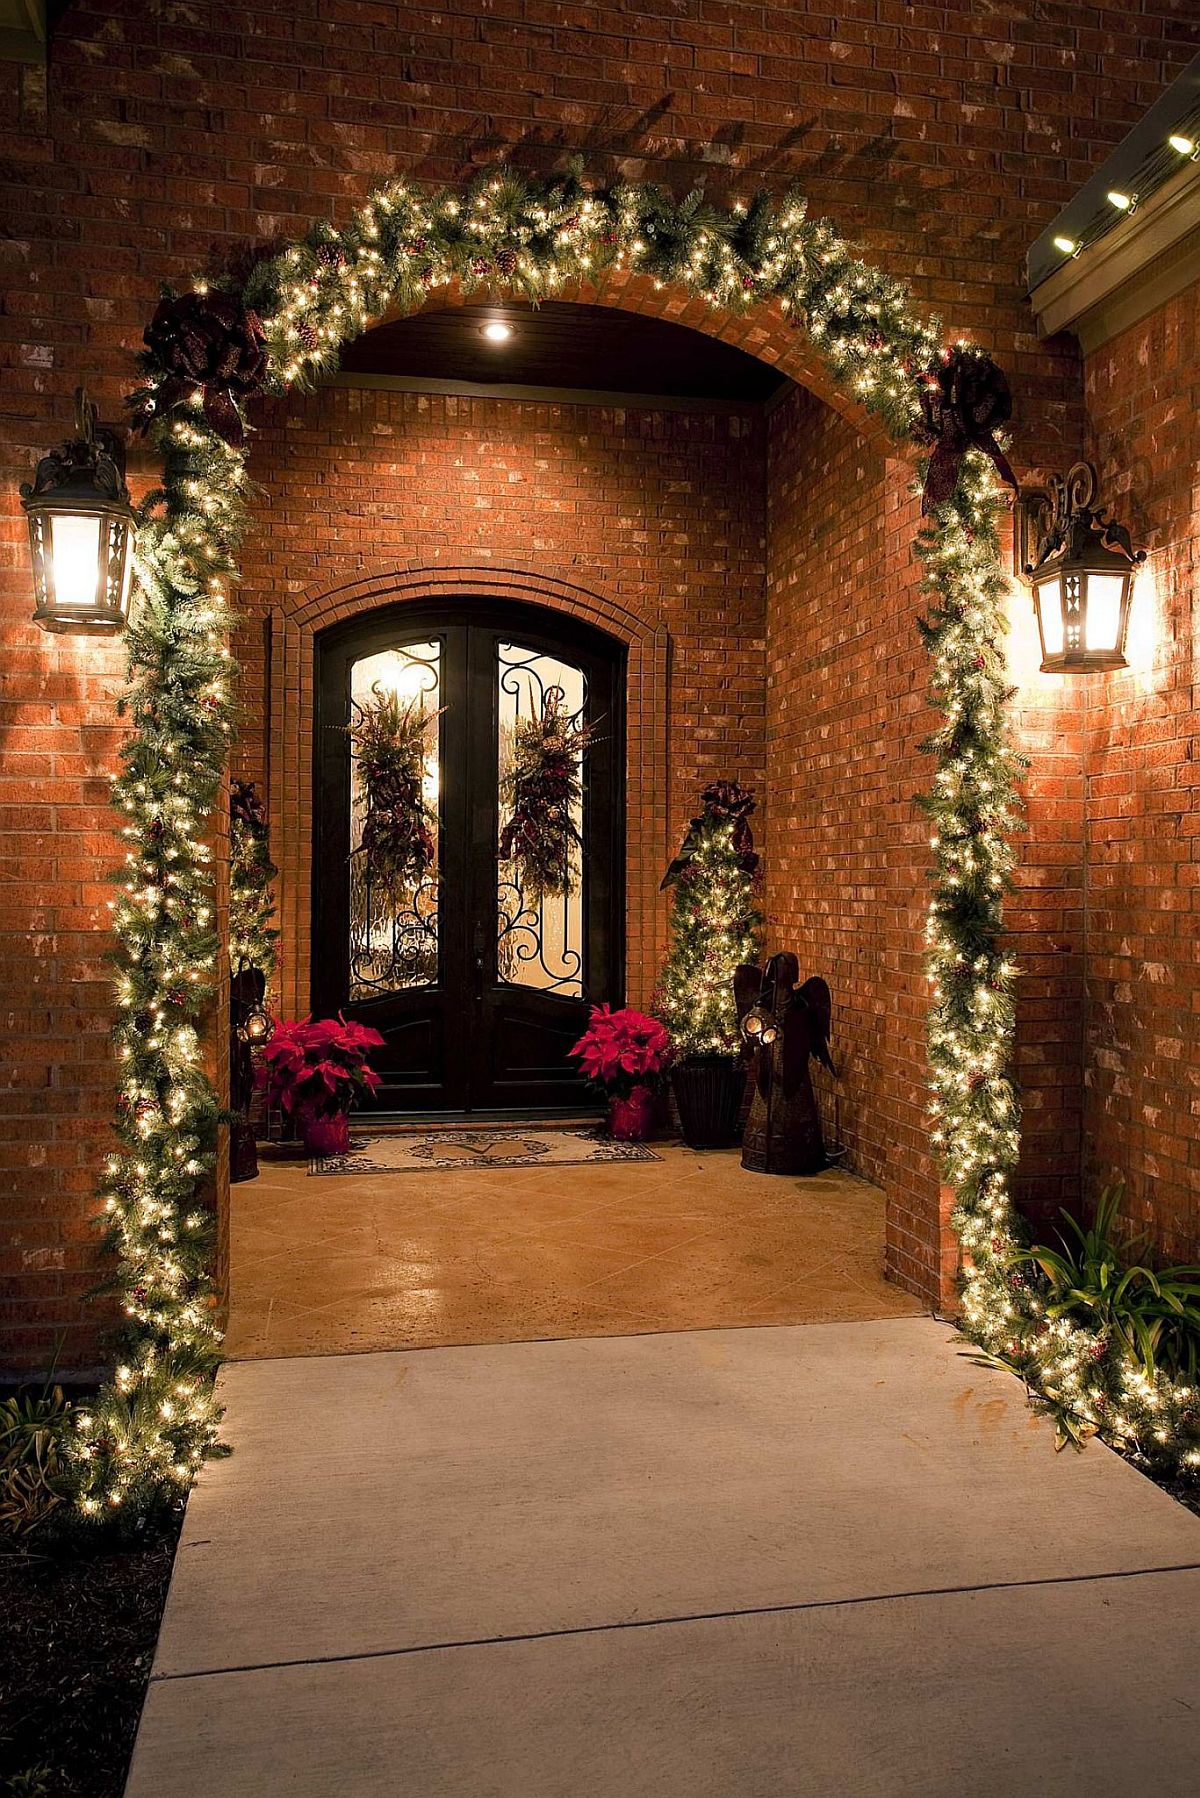 Brilliant-entryway-idea-to-welcome-home-a-magical-Christmas-80725